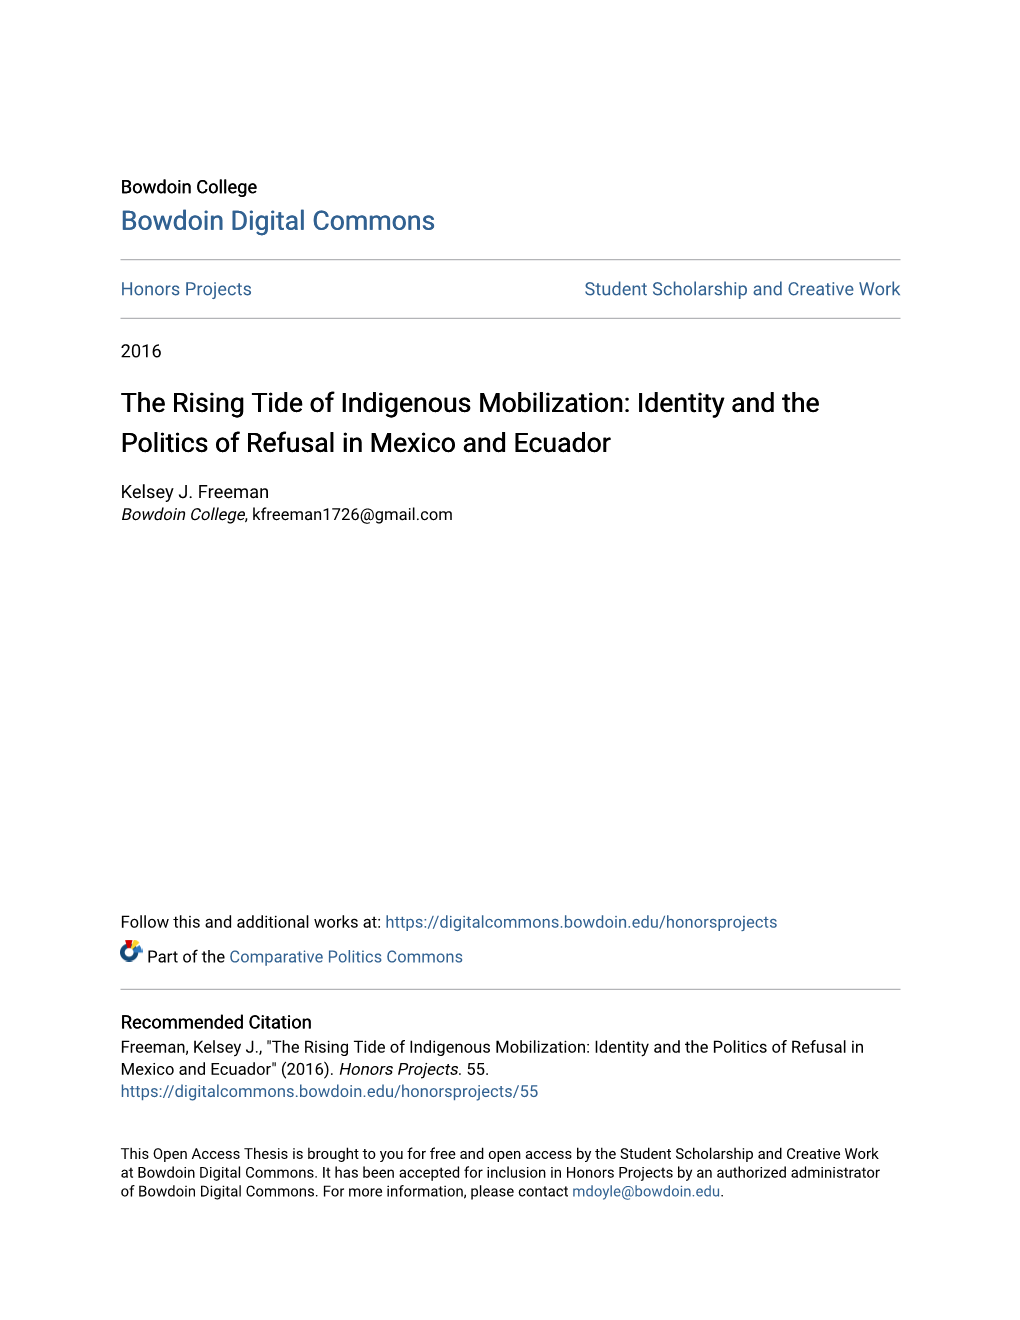 The Rising Tide of Indigenous Mobilization: Identity and the Politics of Refusal in Mexico and Ecuador